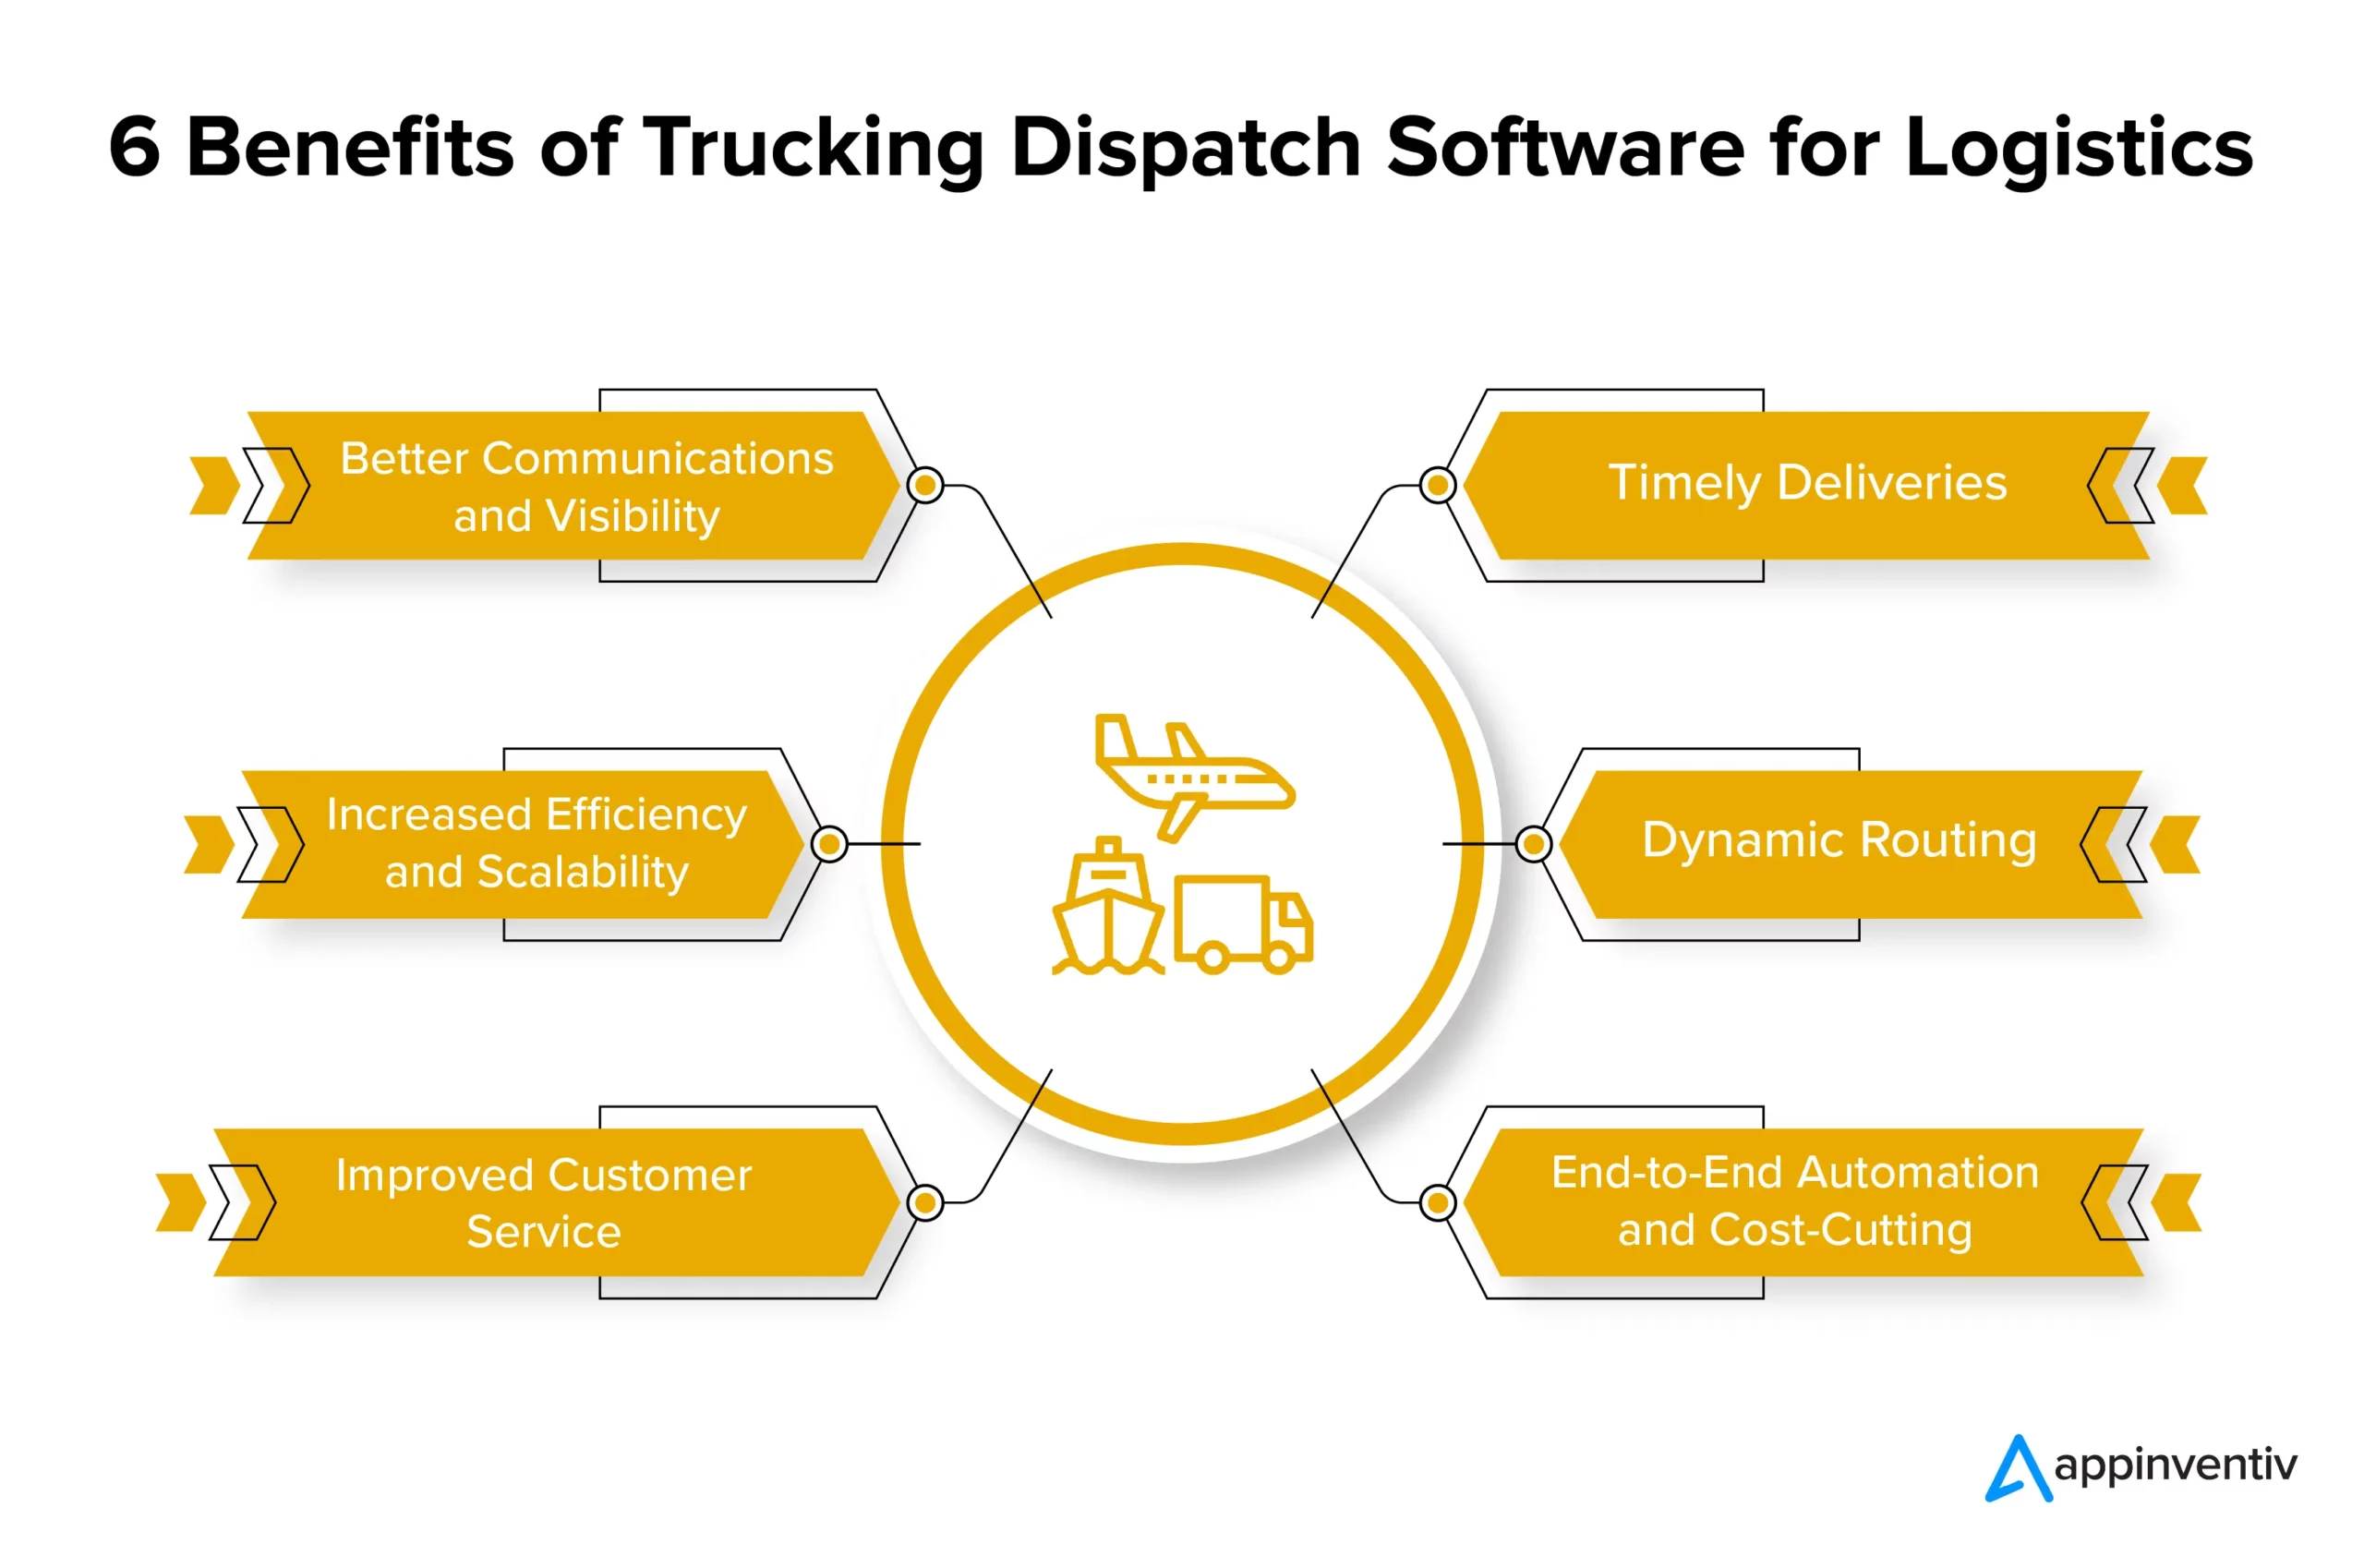 How Does Trucking Dispatch Software Improve Customer Satisfaction With Effective Delivery Tracking And Communication?